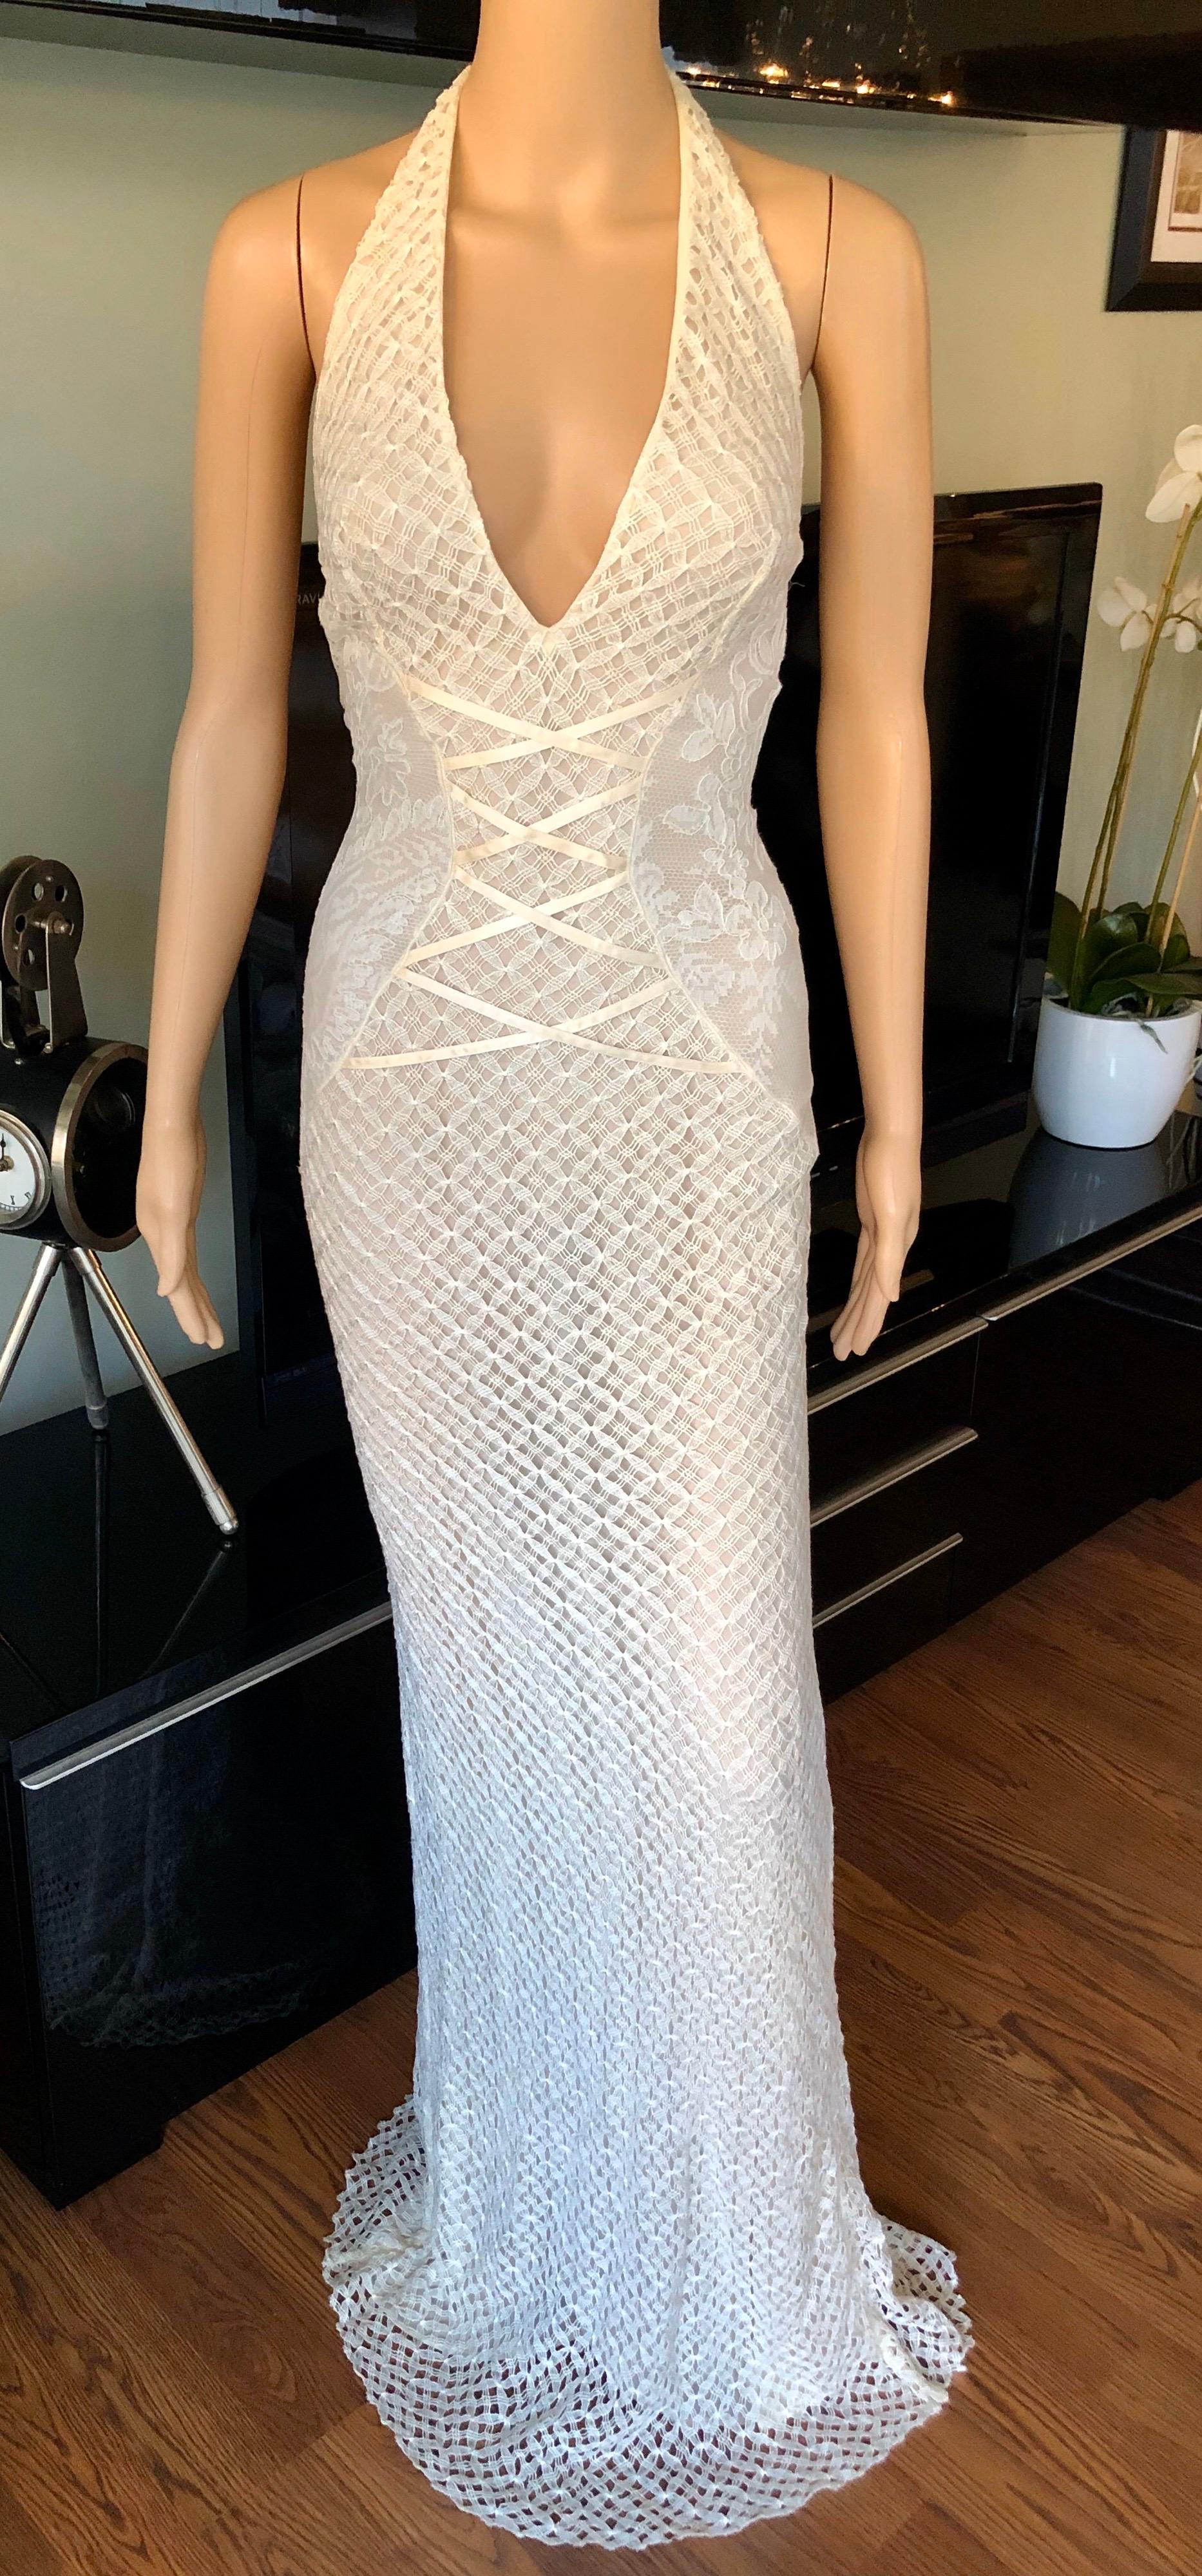 Women's or Men's NWT Gianni Versace S/S 2002 Plunging Backless Semi Sheer Lace Ivory Dress Gown For Sale